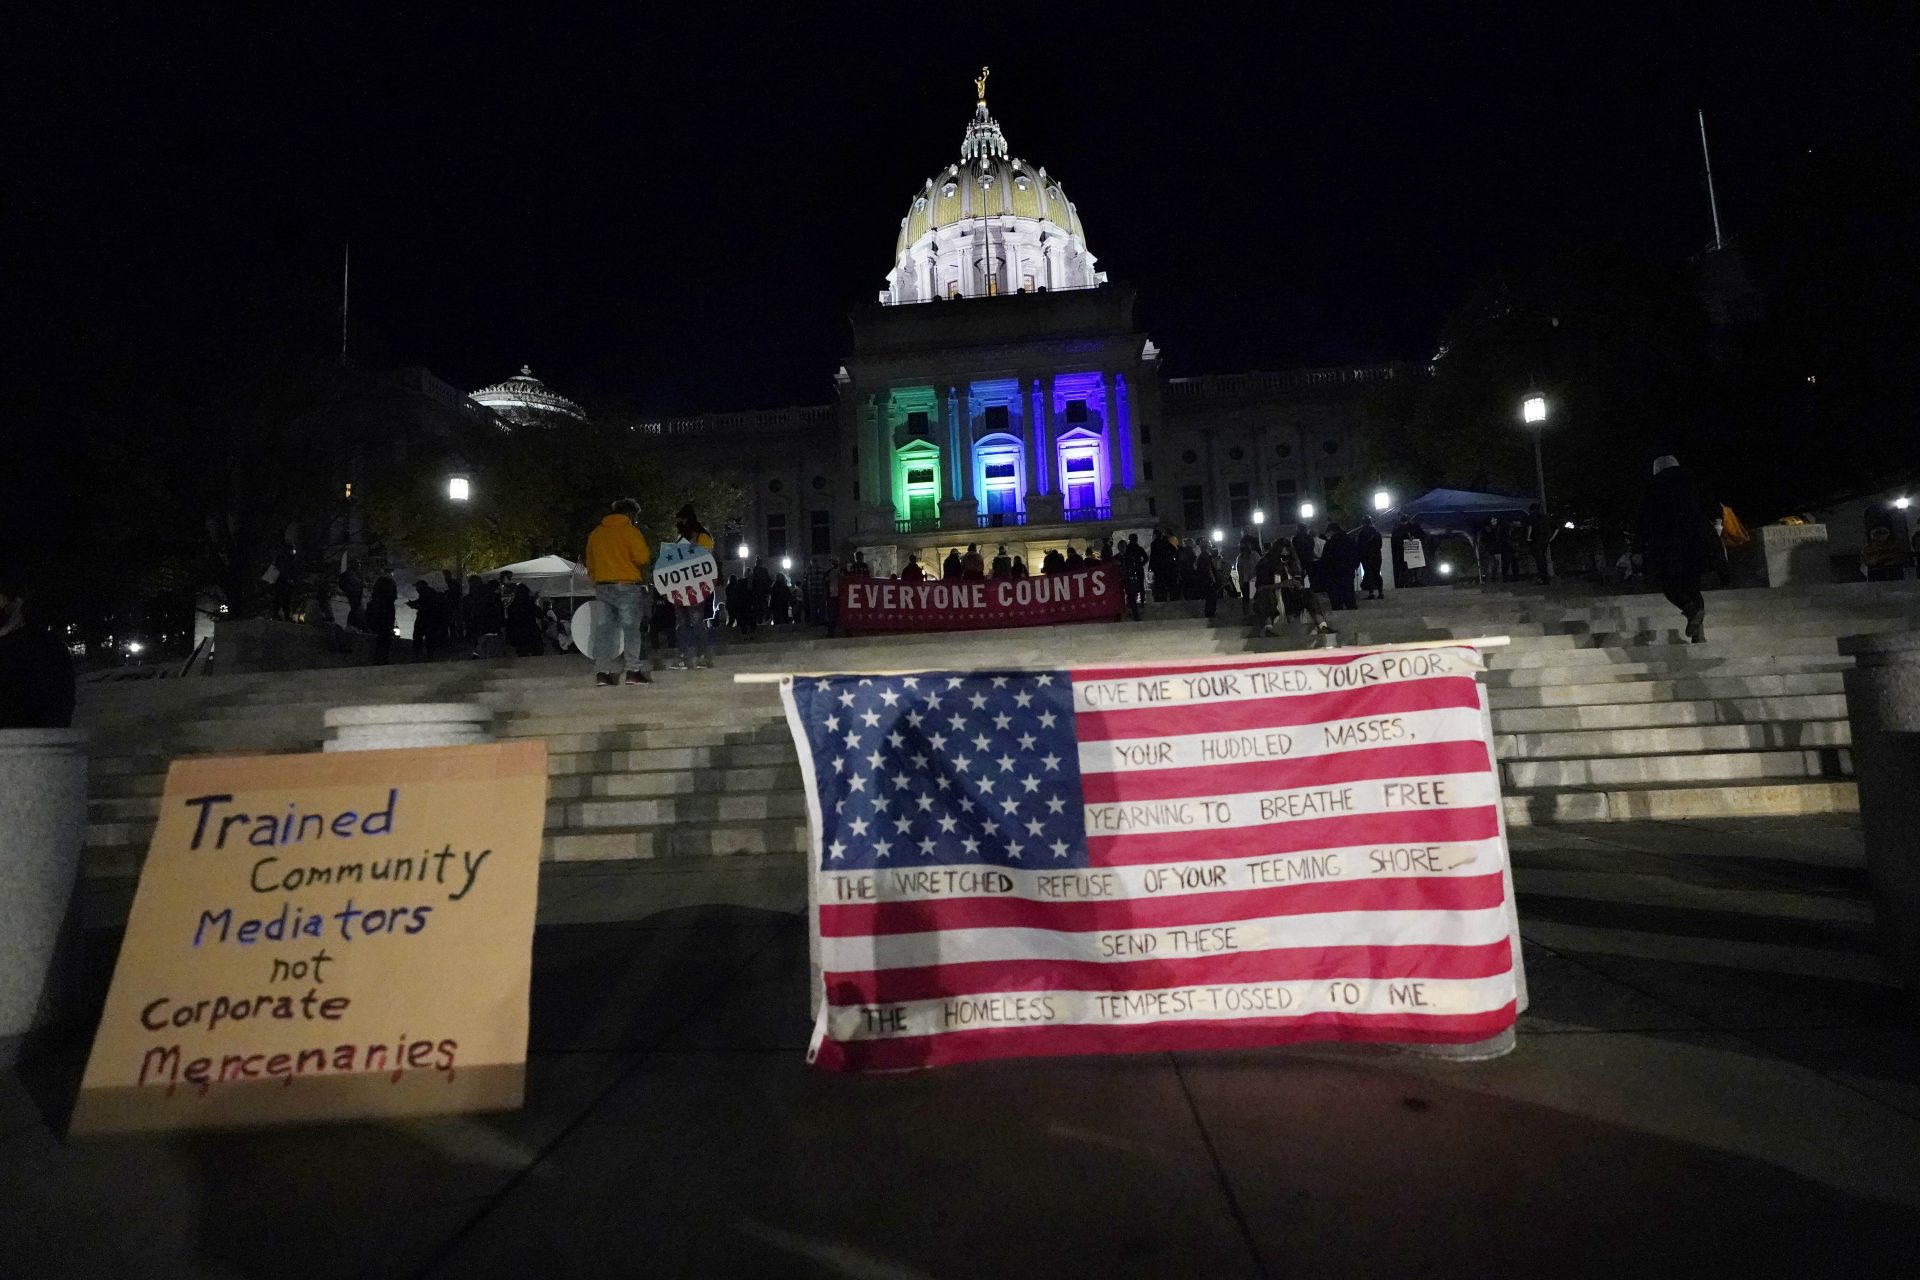 People demonstrate outside the Pennsylvania State Capitol to urge that all votes be counted, Wednesday, Nov. 4, 2020, in Harrisburg, Pa., following Tuesday's election.